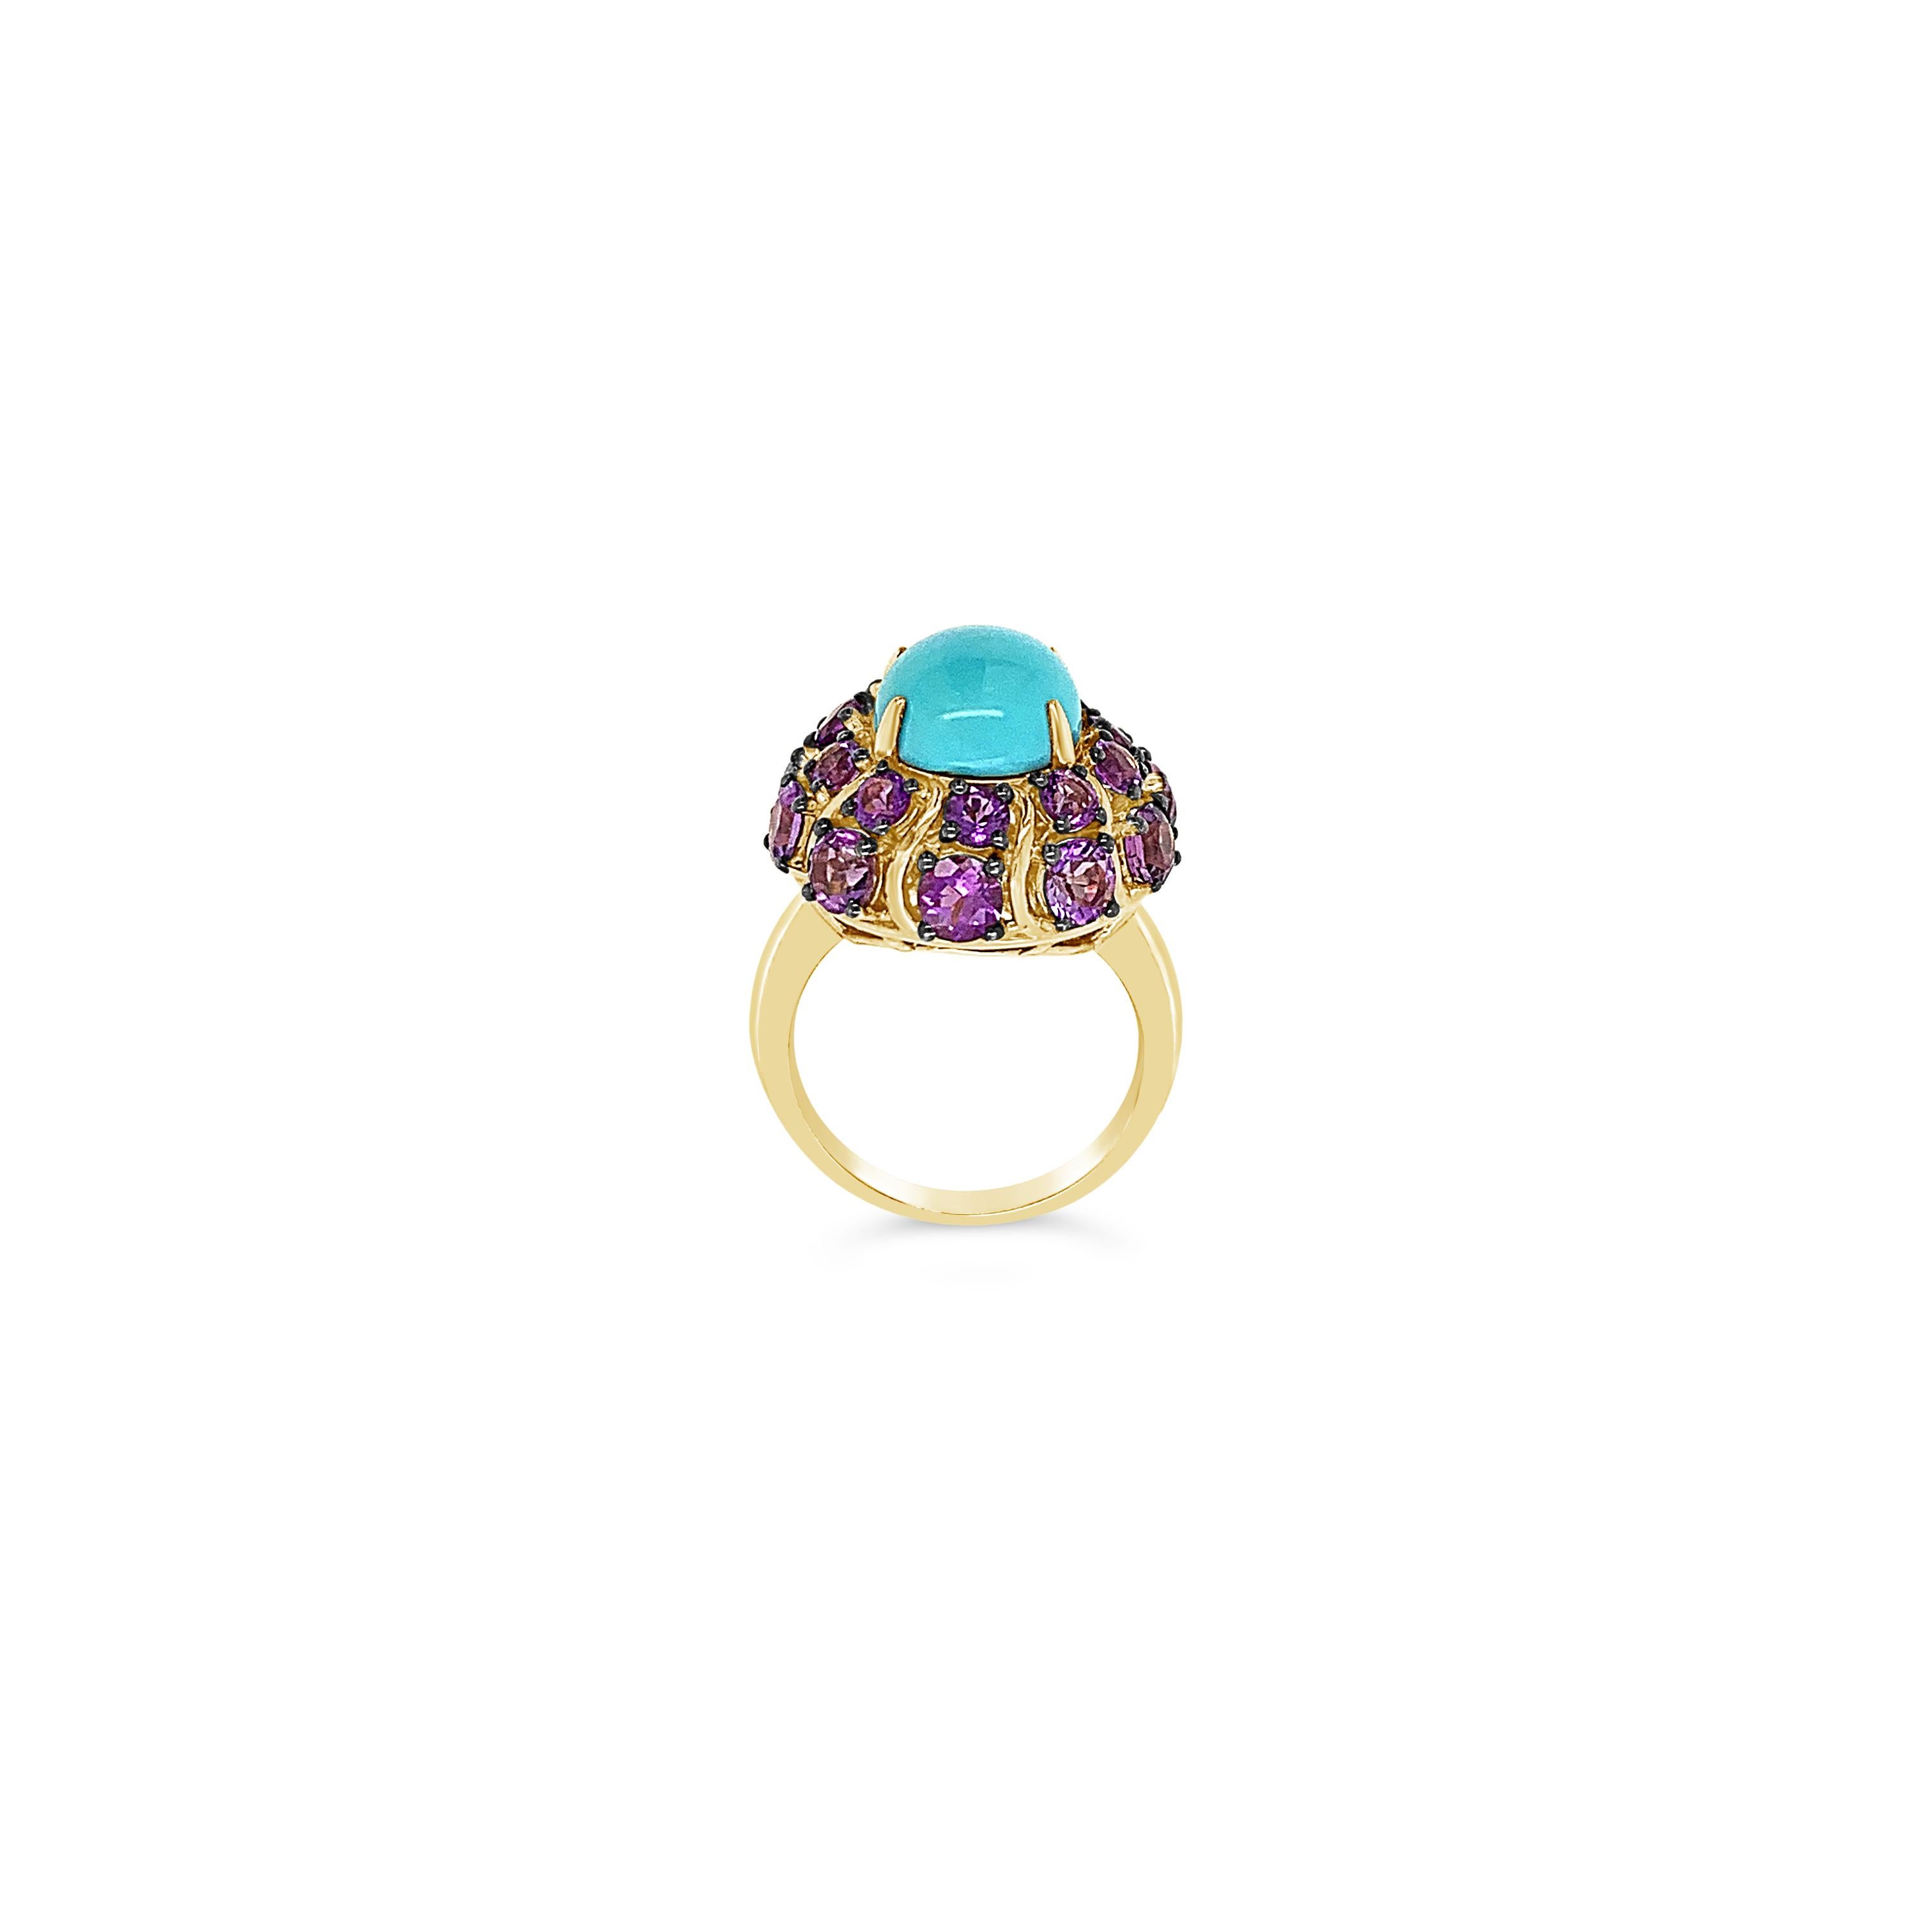 Oval Cut Carlo Viani 14K Yellow Gold Sleeping Beauty Turquoise and Amethyst Cocktail Ring